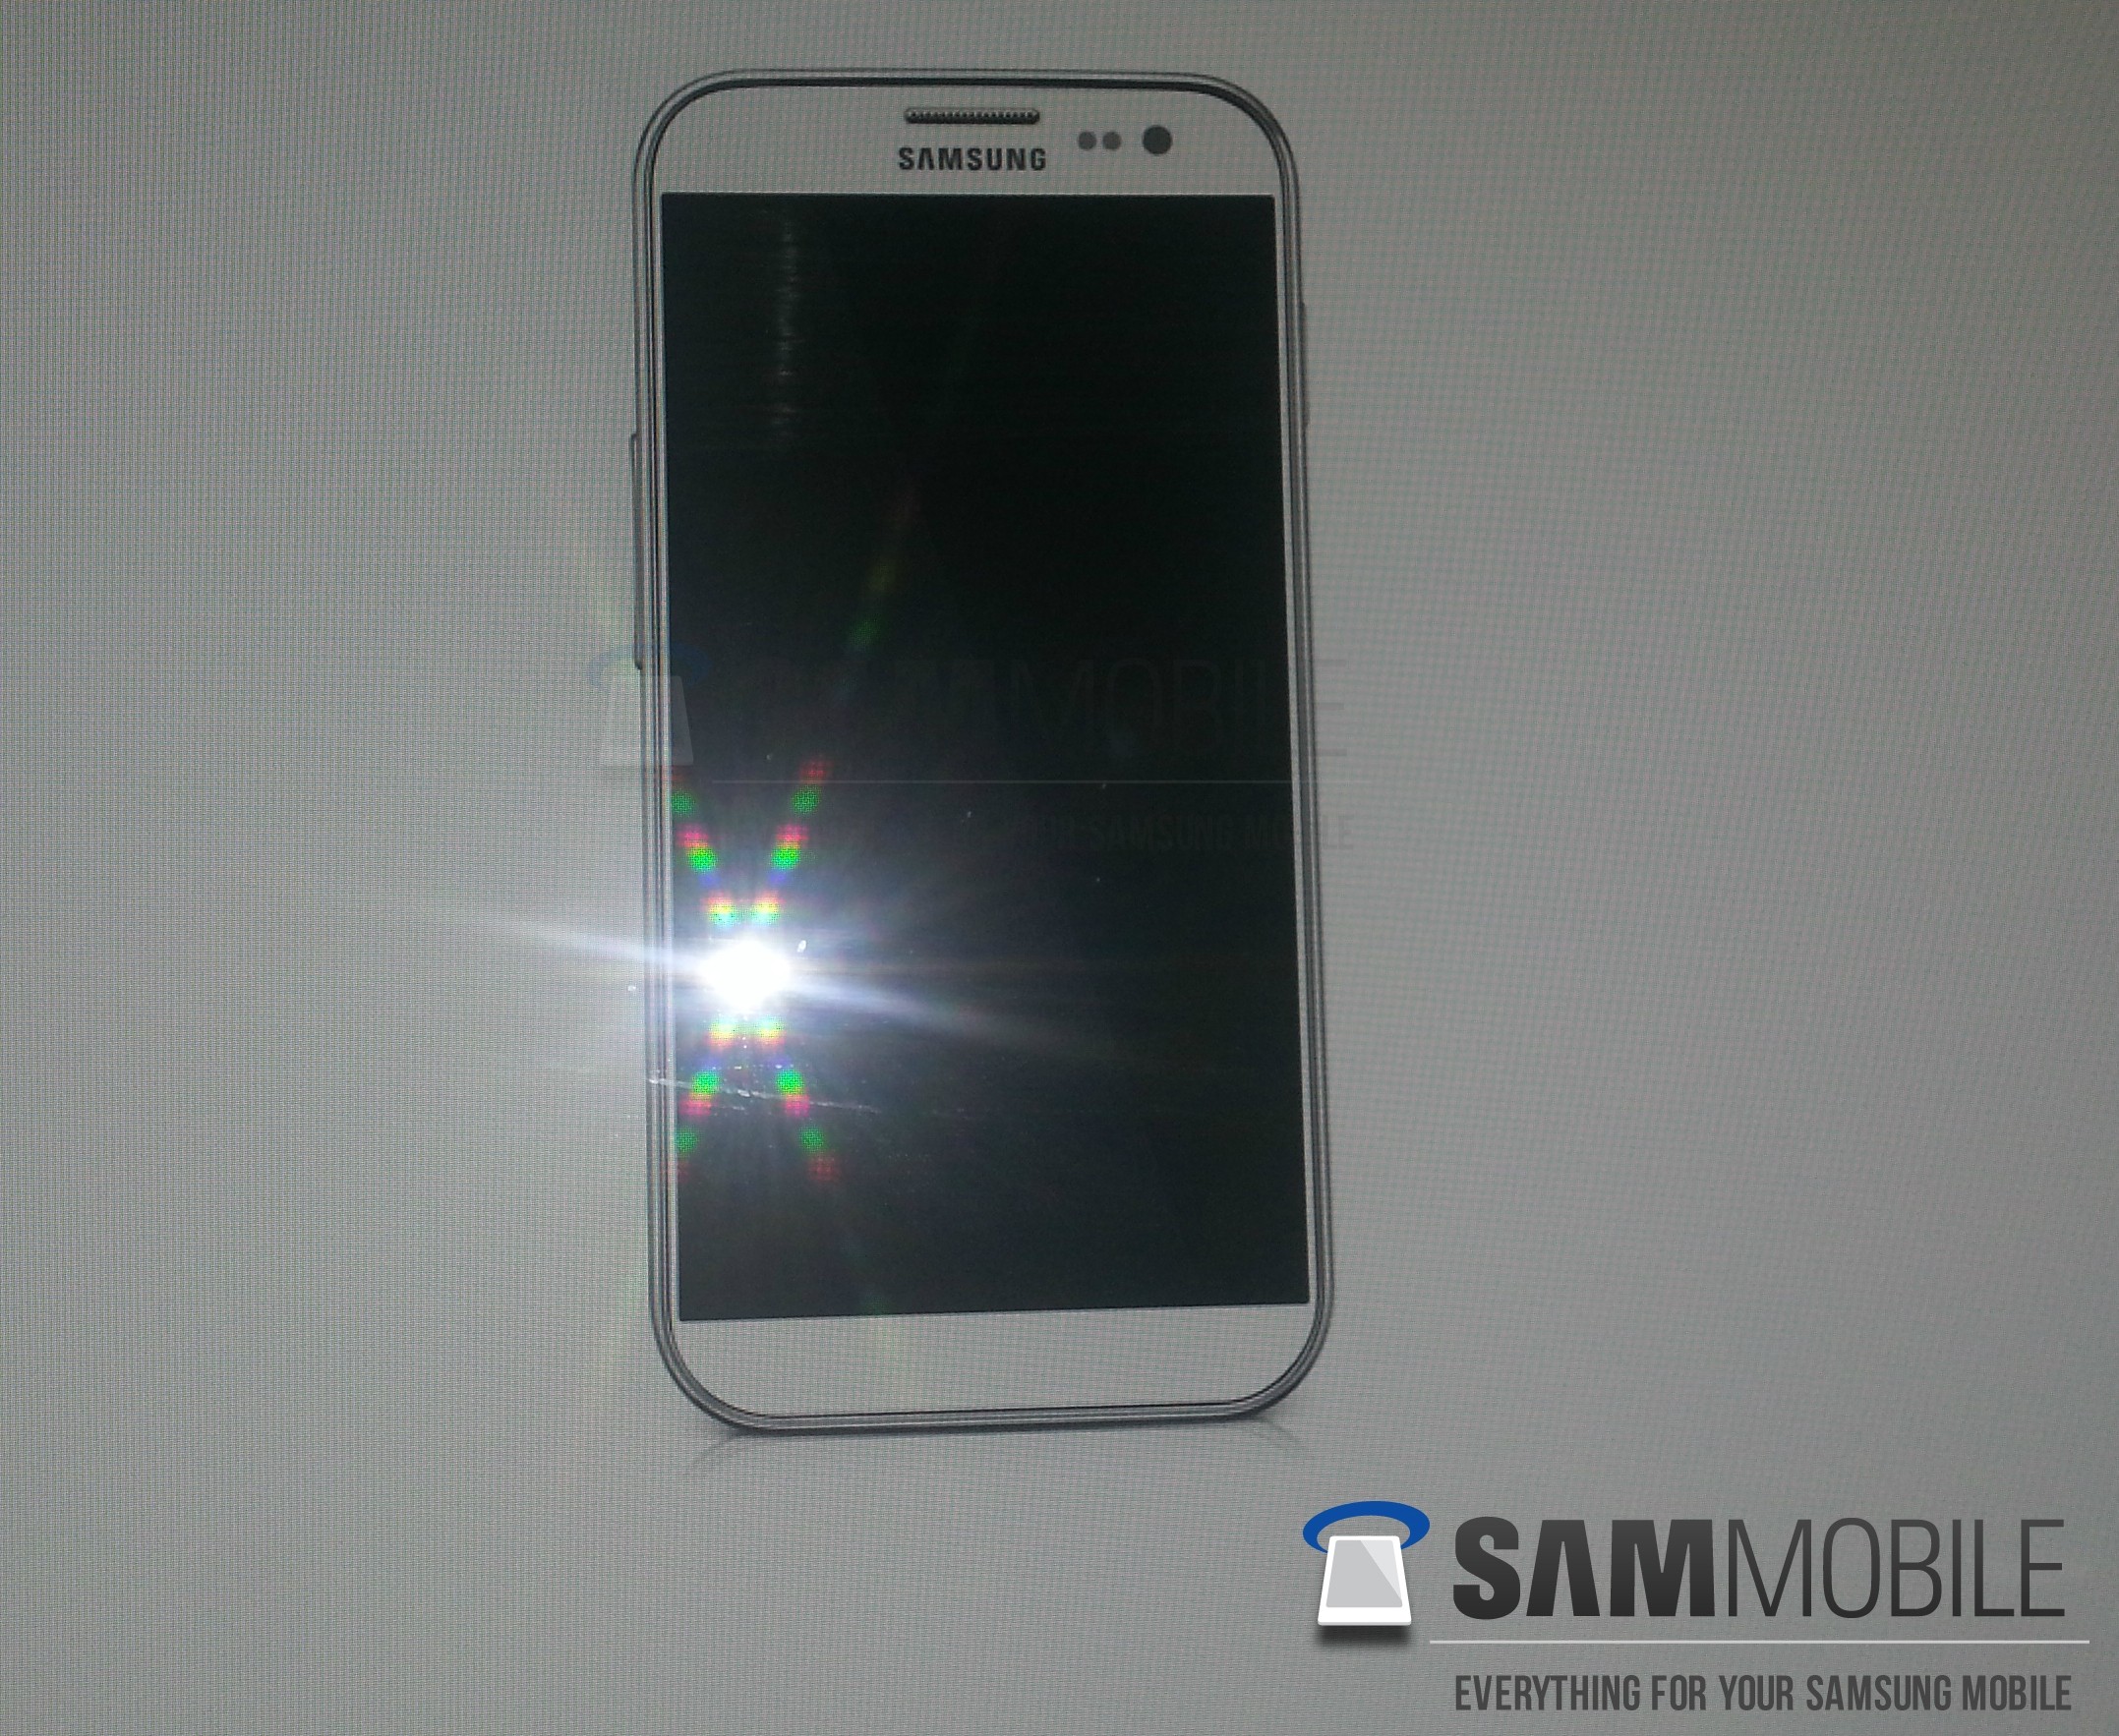 Samsung Galaxy S4 Leaked Picture